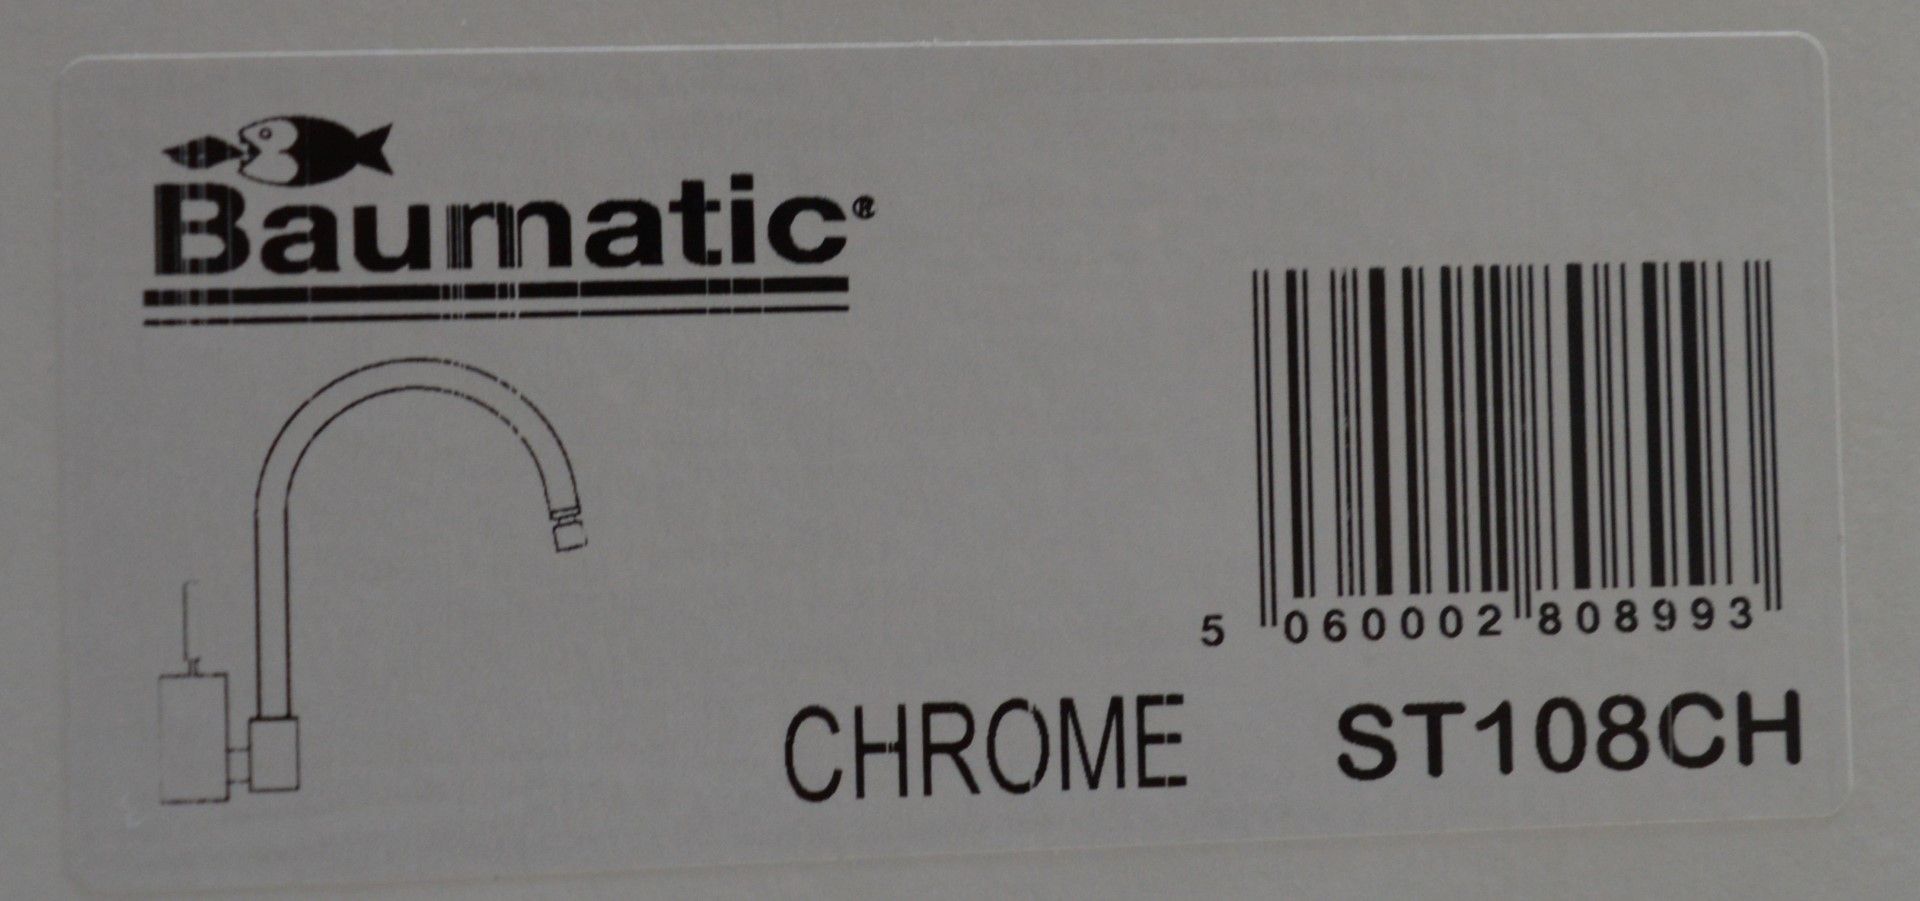 1 x Baumatic ST108CH Avalon Mixer Tap in Chrome – NEW & BOXED – CL053 – Location: Altrincham - Image 2 of 8